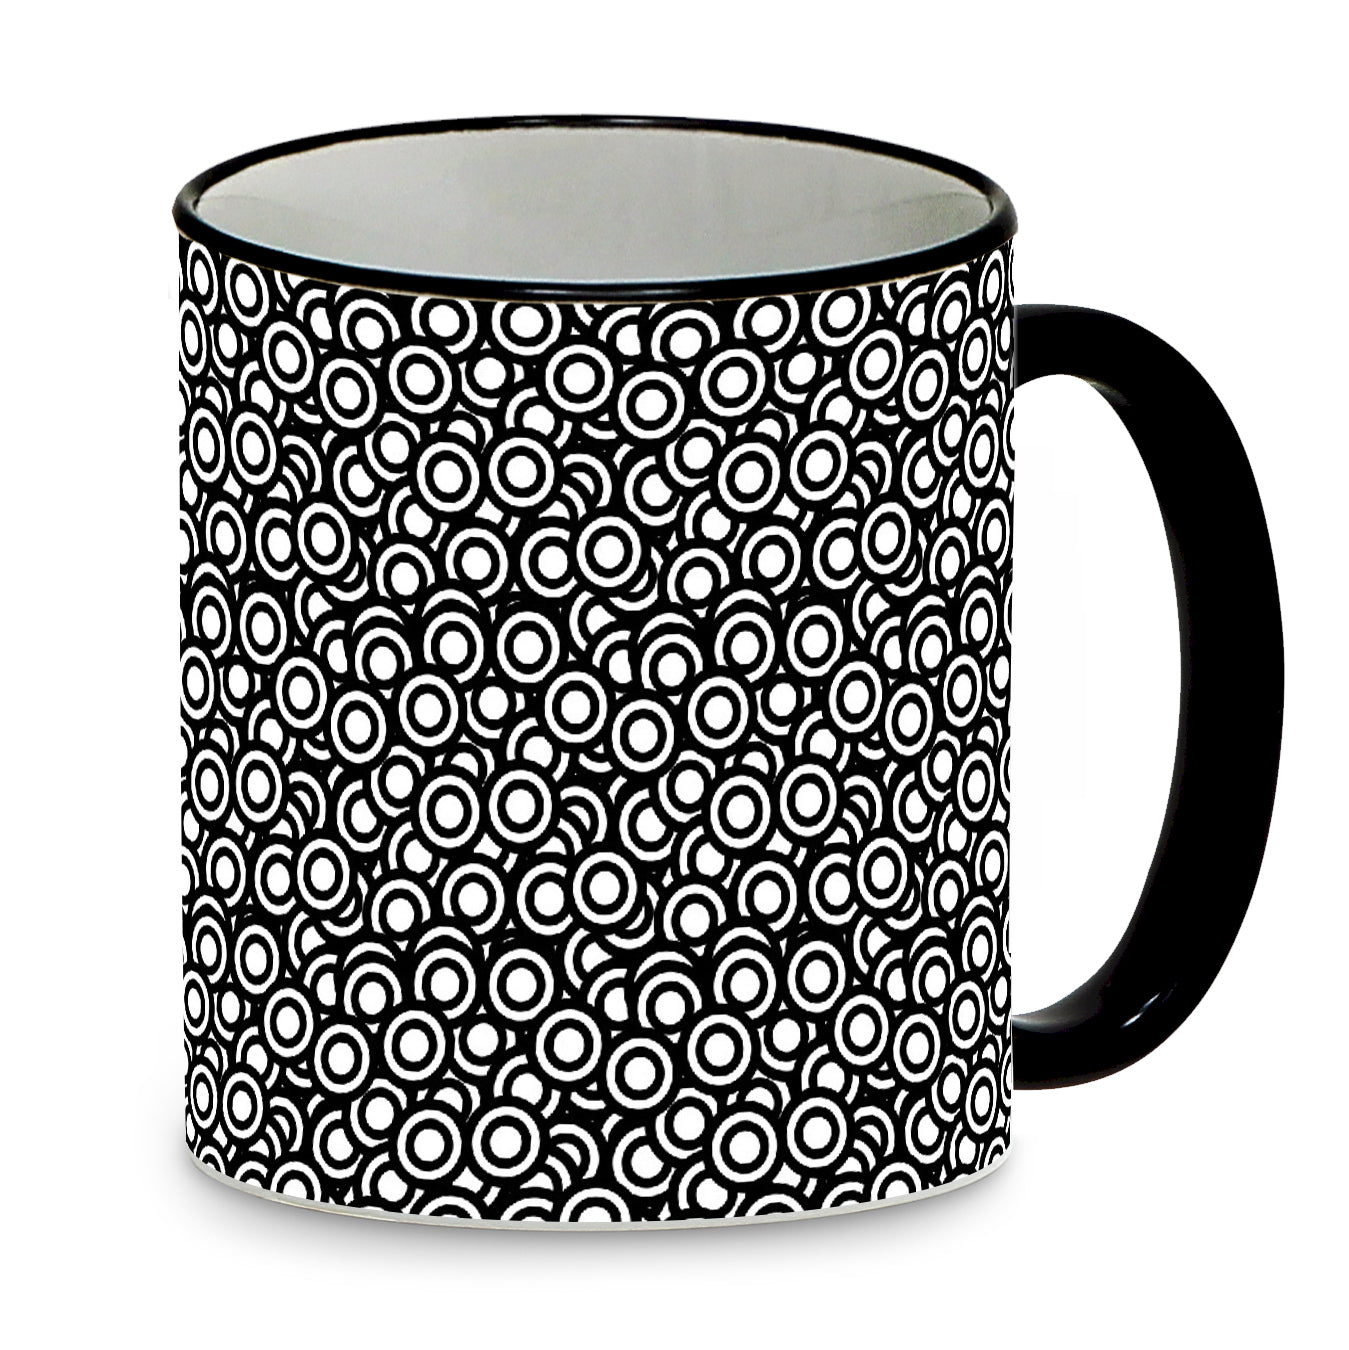 SUBLIMART: B&W Beauty  - Mug featuring a dramatic circle design in black and white - Artistica.com